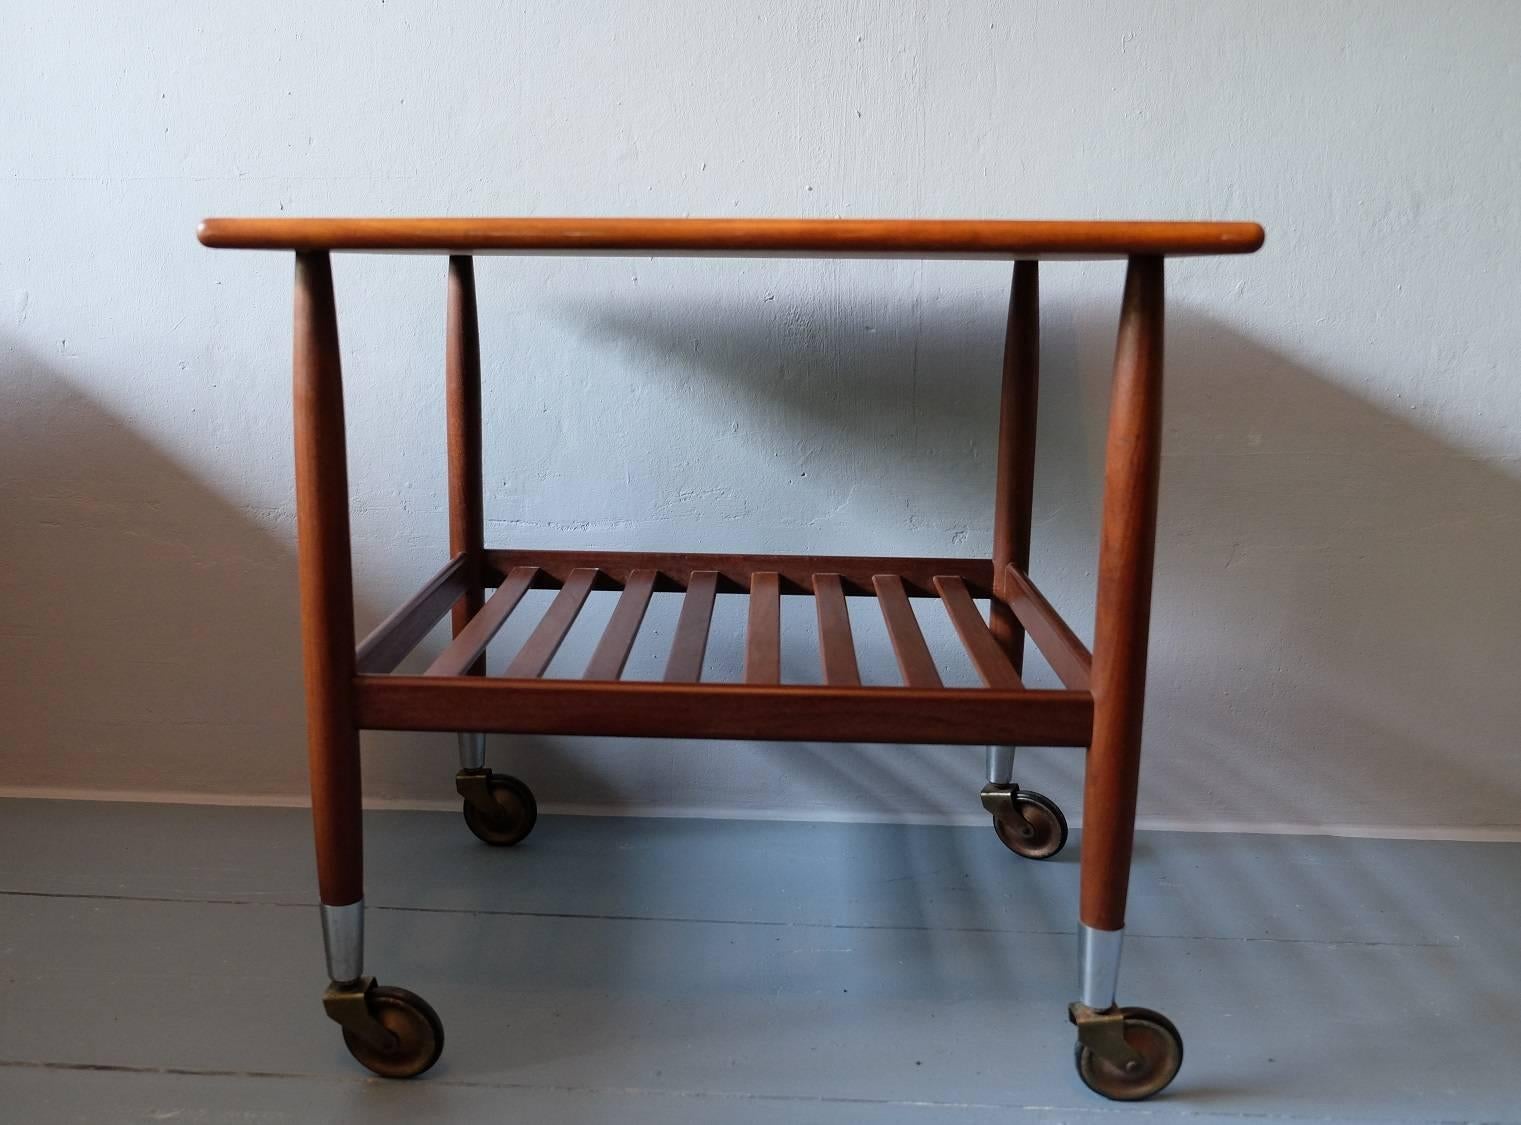 Danish teak serving trolley with a nice teak grain on the top and slatted shelf underneath, Mid-Century.
Very good vintage condition with minimal signs of age and use.